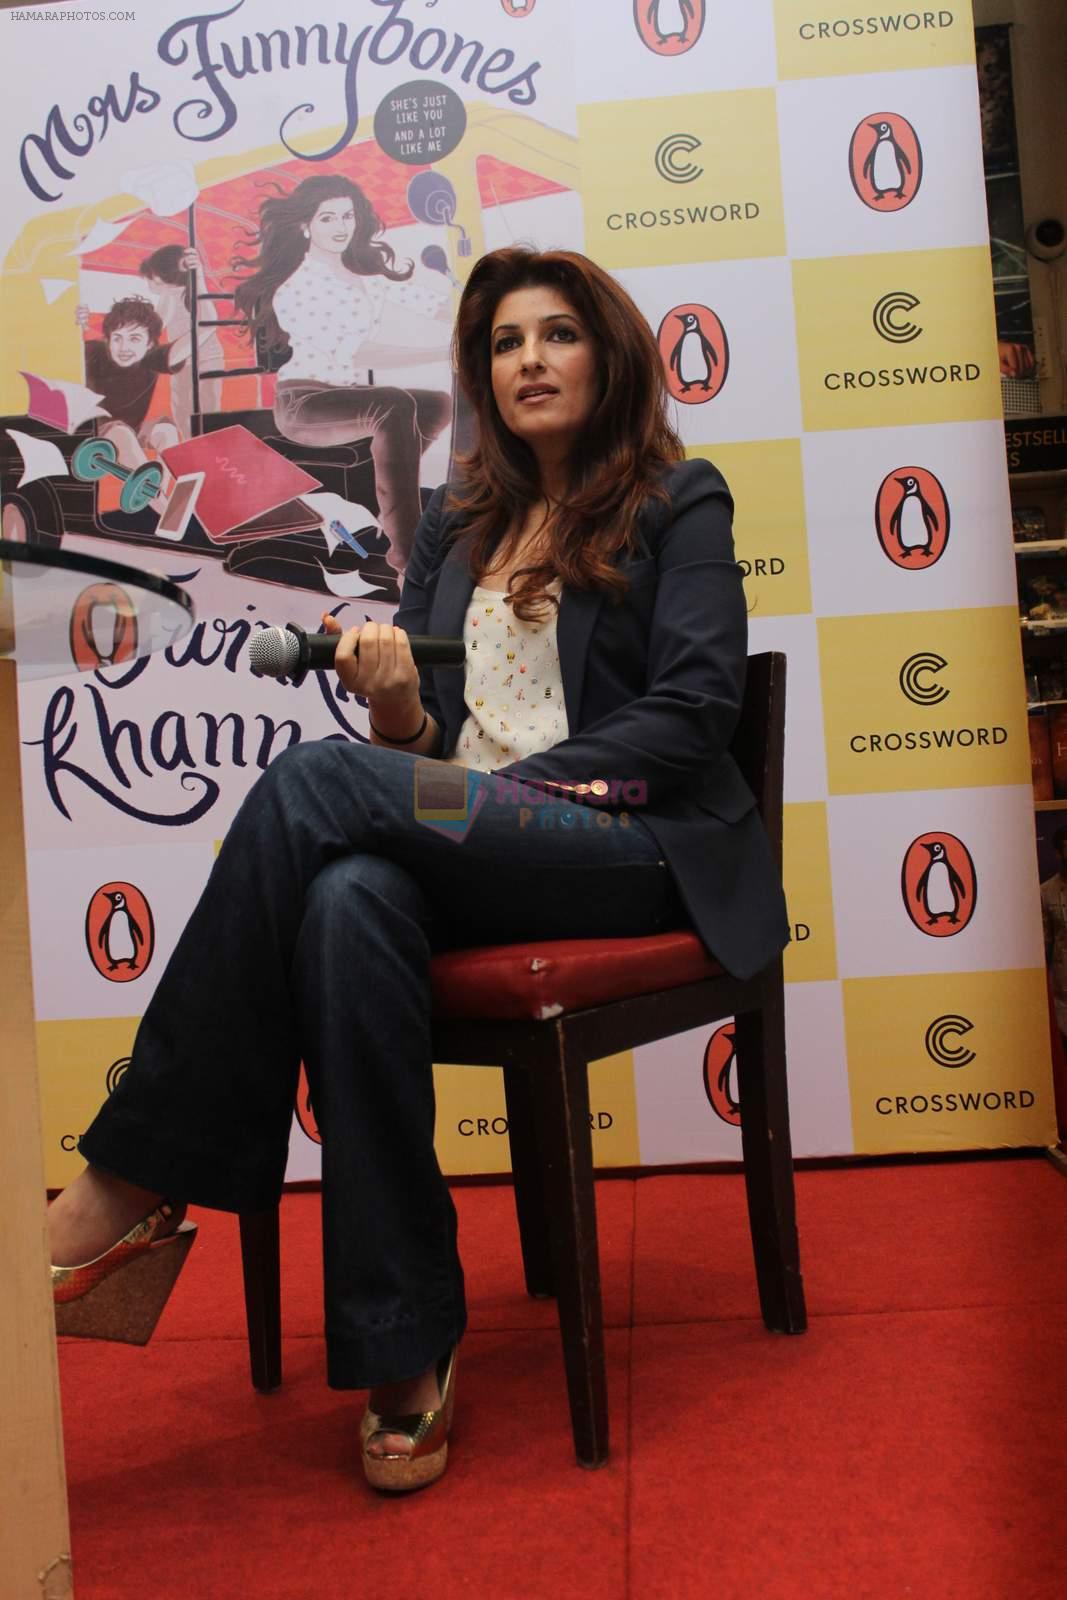 Twinkle khanna book reading on 3rd Sept 2015